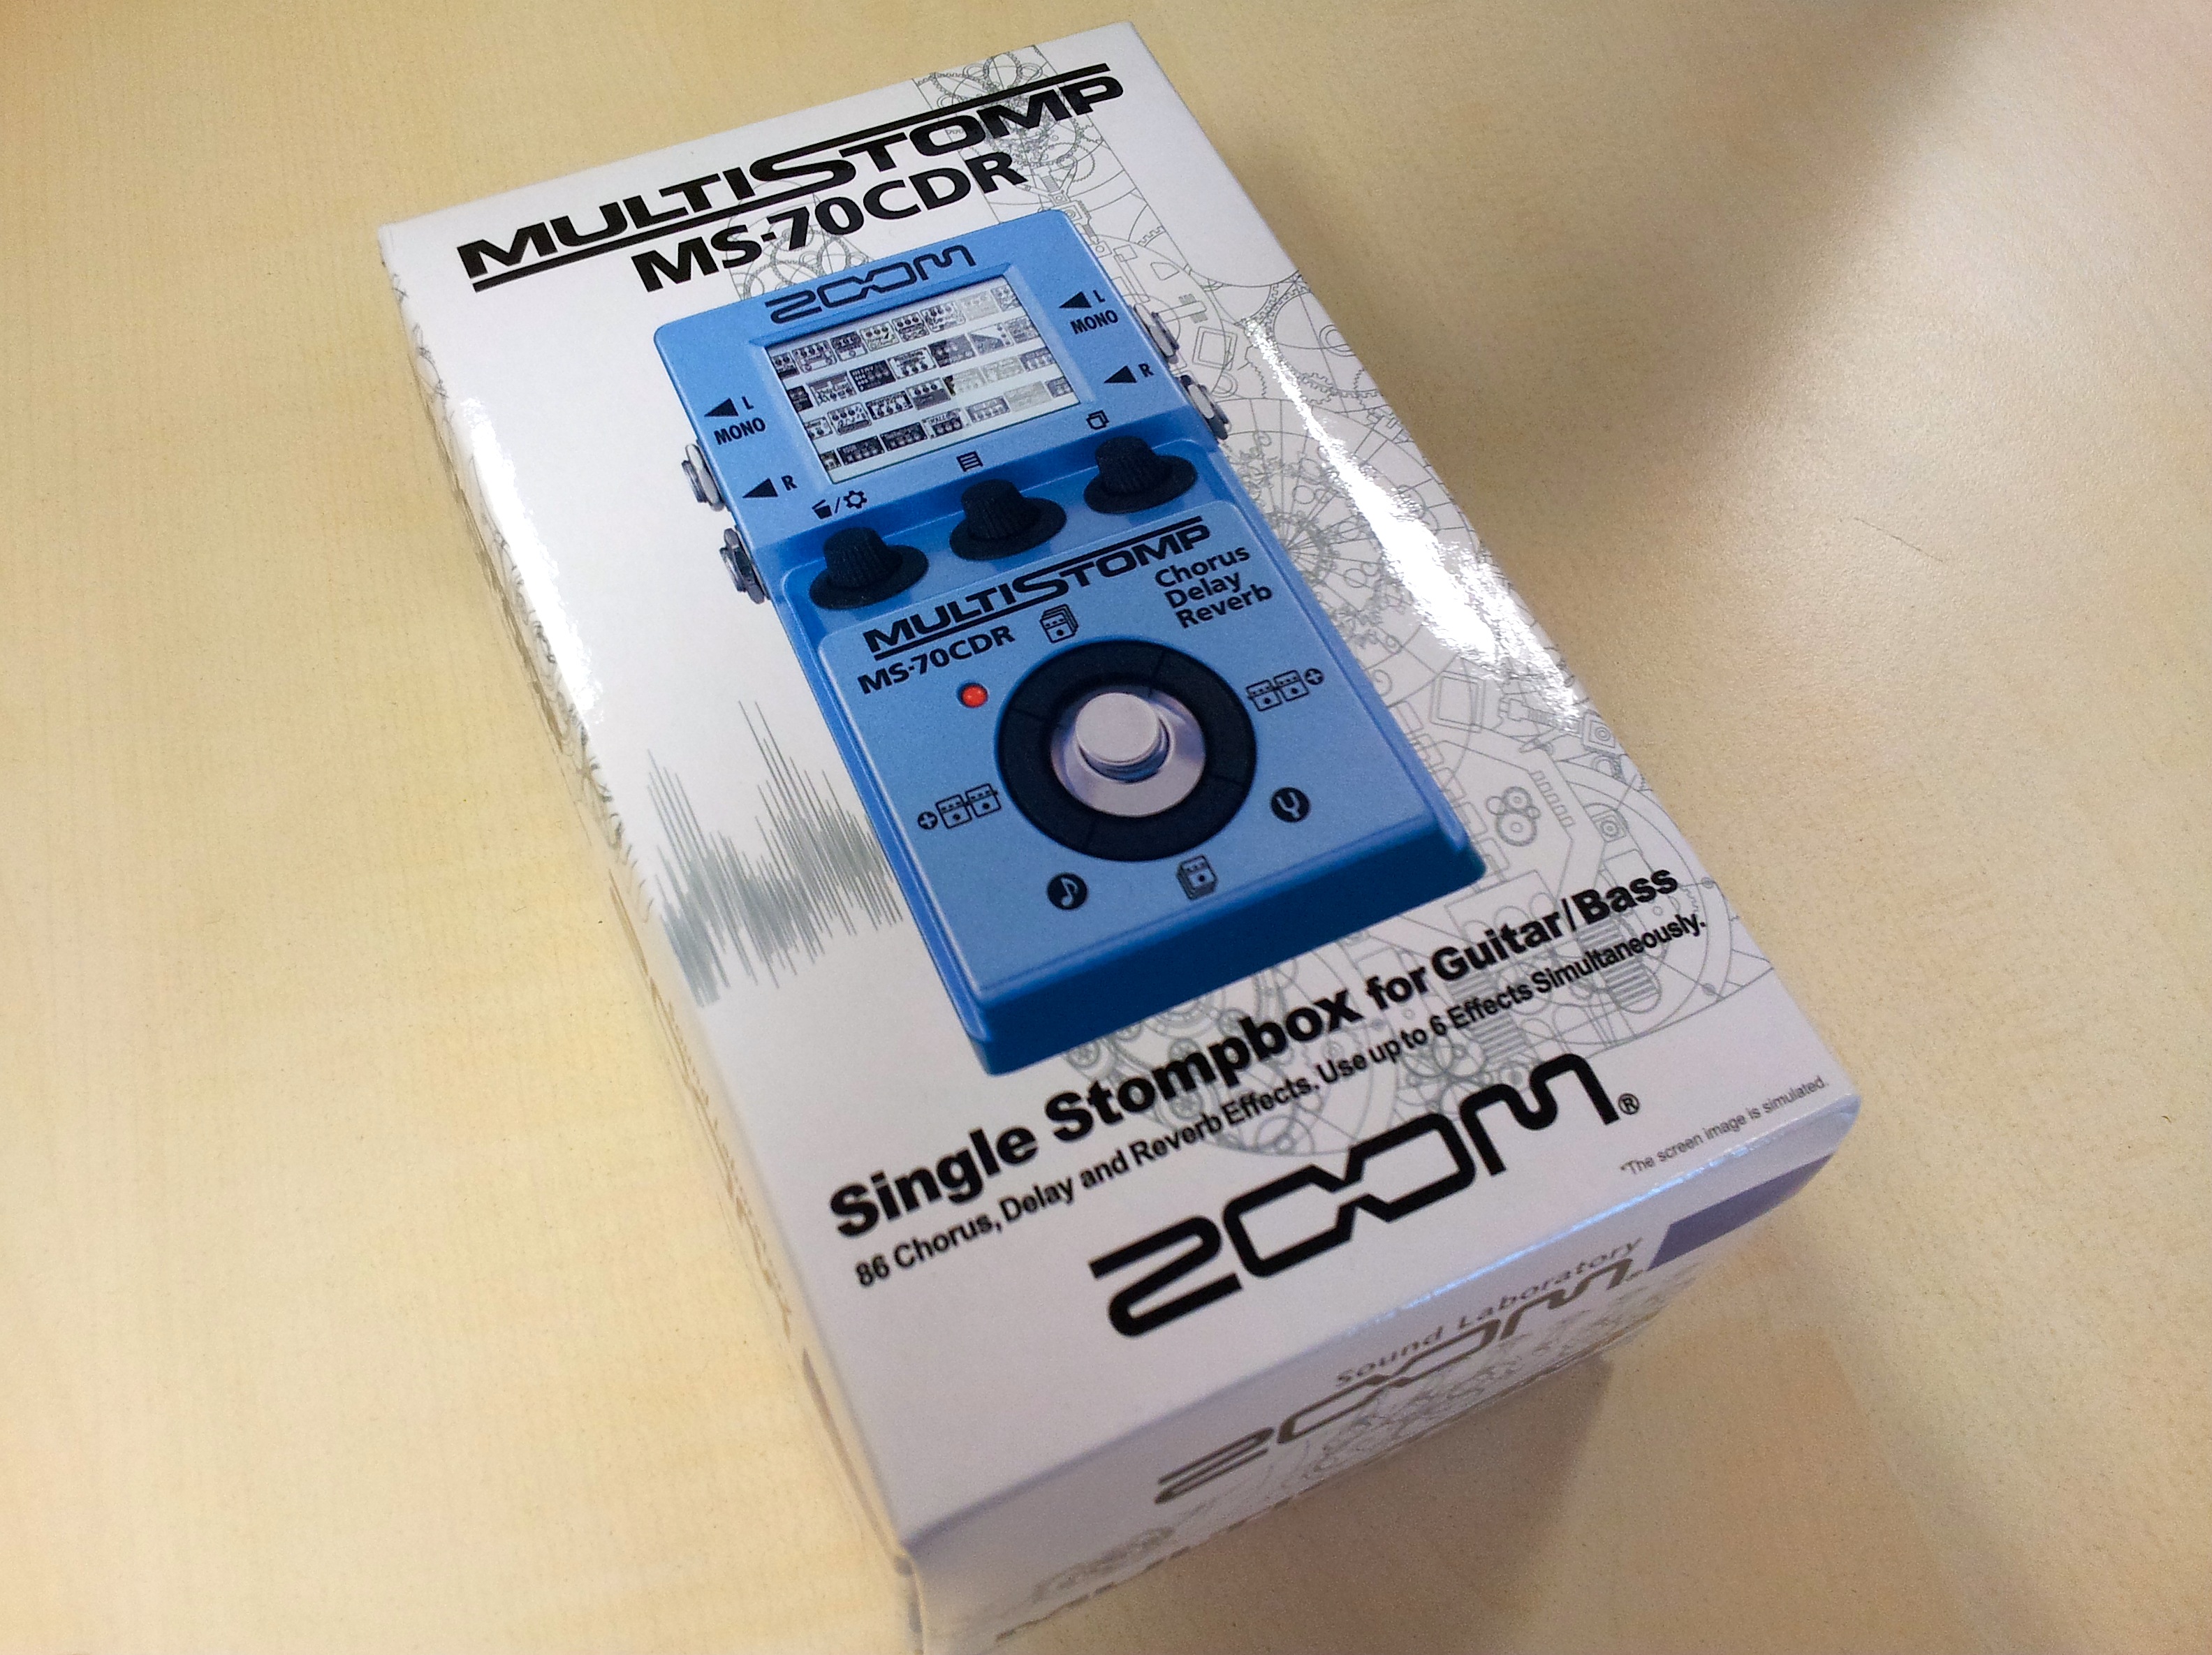 In pictures: Zoom MultiStomp MS-70CDR unboxed | MusicRadar